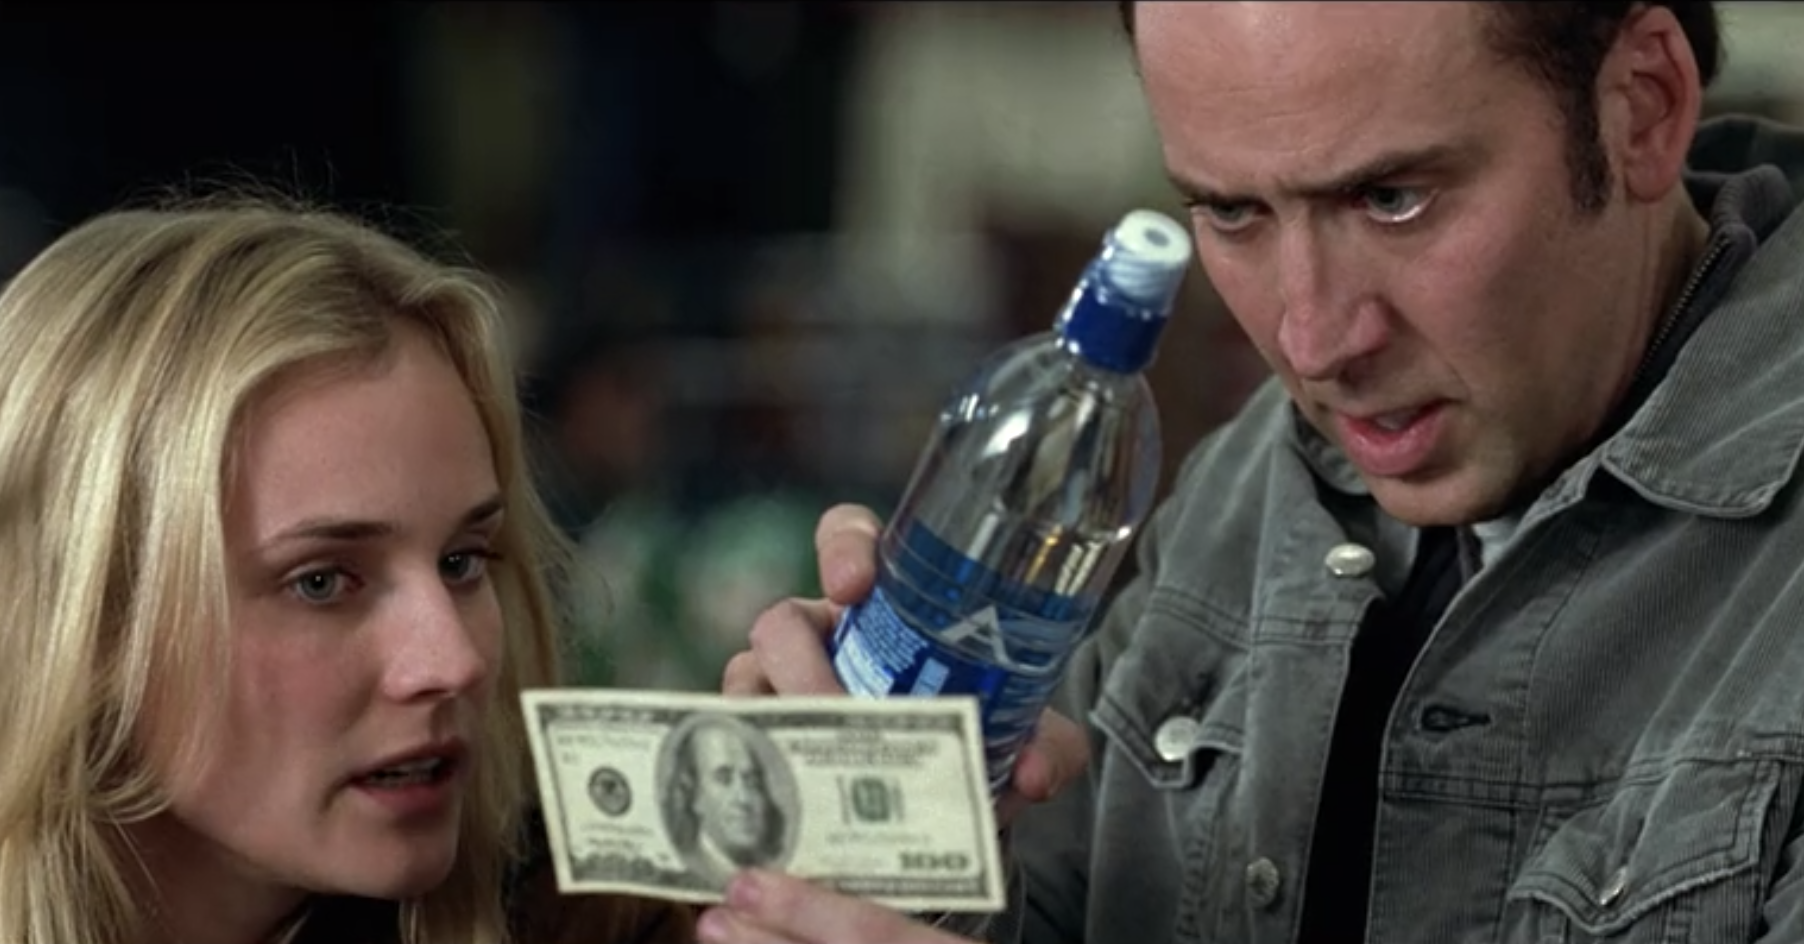 Ben Gates sends his intense and frightening stare through a water bottle and onto a hundred dollar bill below. Dr. Abigail Chase looks on.